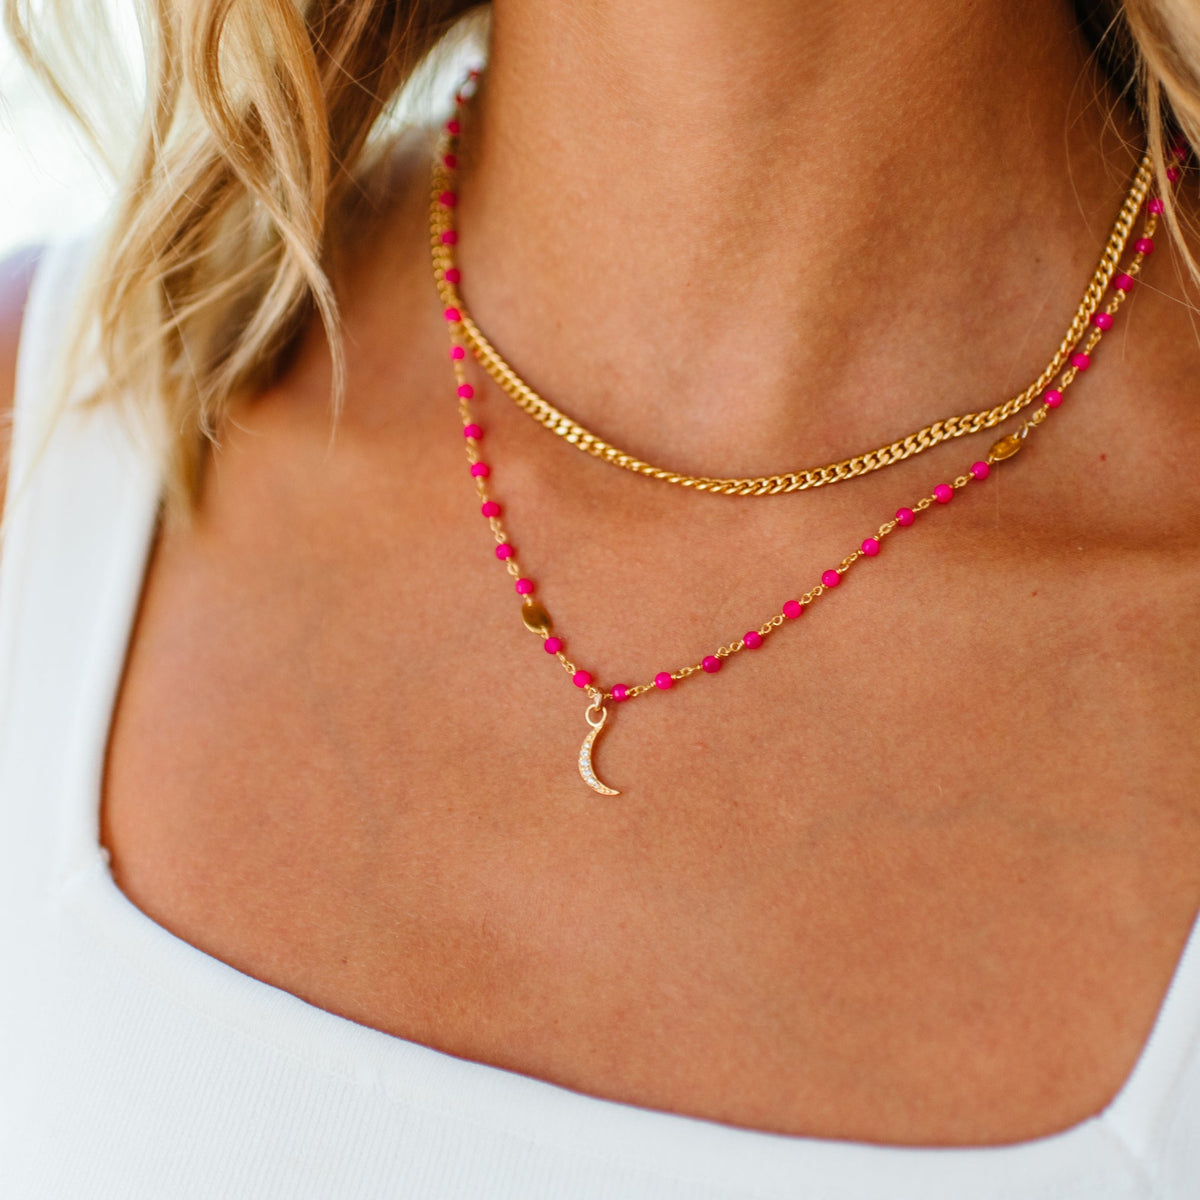 ICONIC SHORT BEADED NECKLACE - HOT PINK CHALCEDONY &amp; GOLD 16-20&quot; - SO PRETTY CARA COTTER